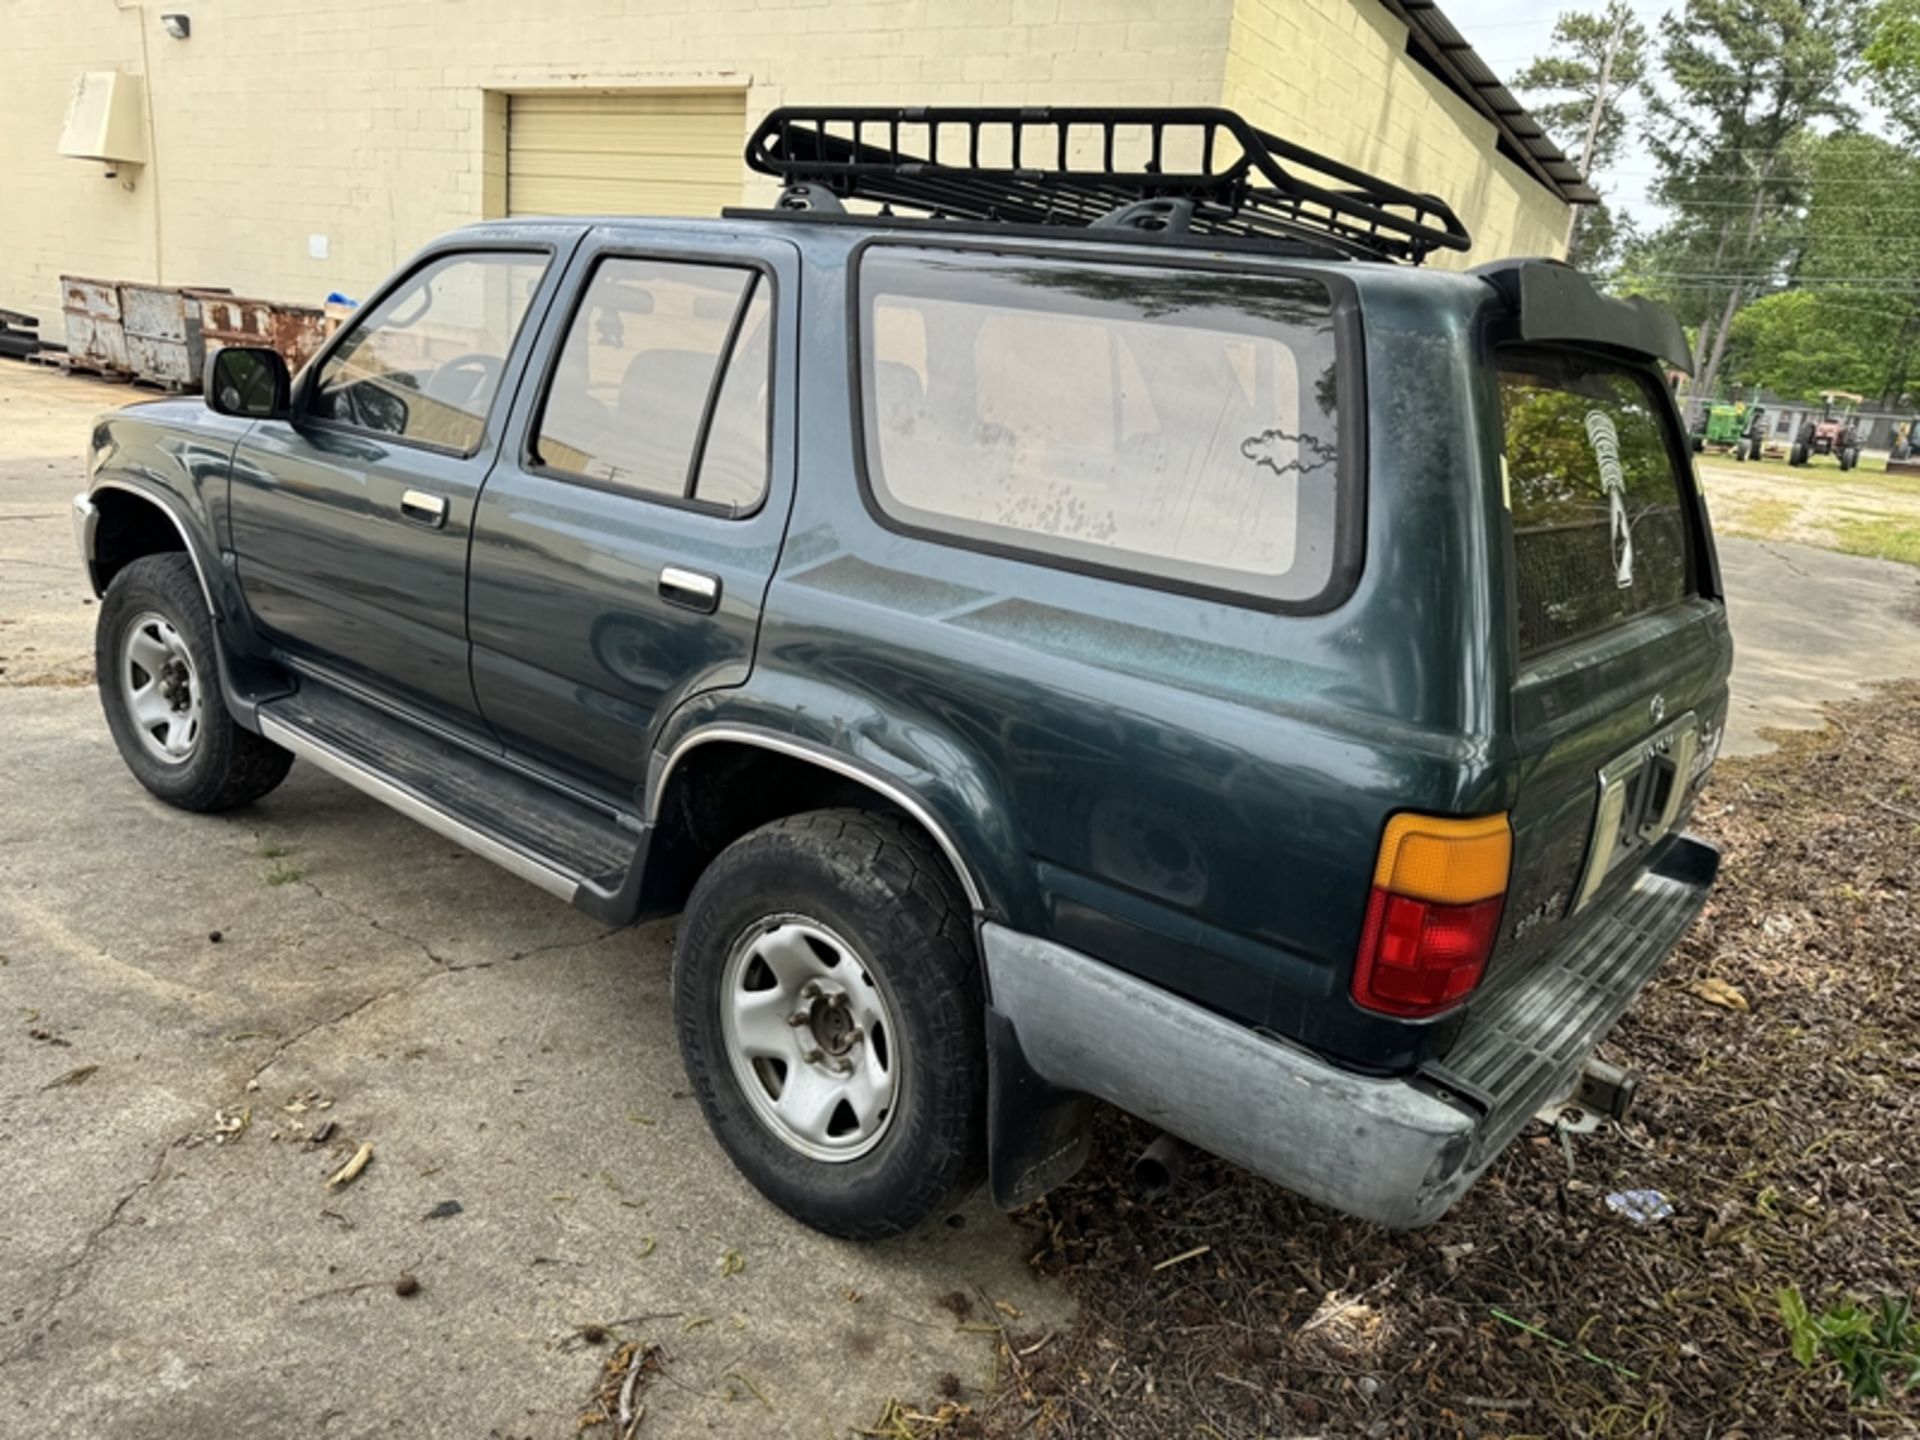 1994 TOYOTA 4Runner, 4wd, not running – mileage unknown – JT3VN39W1R0162964 - Image 4 of 7